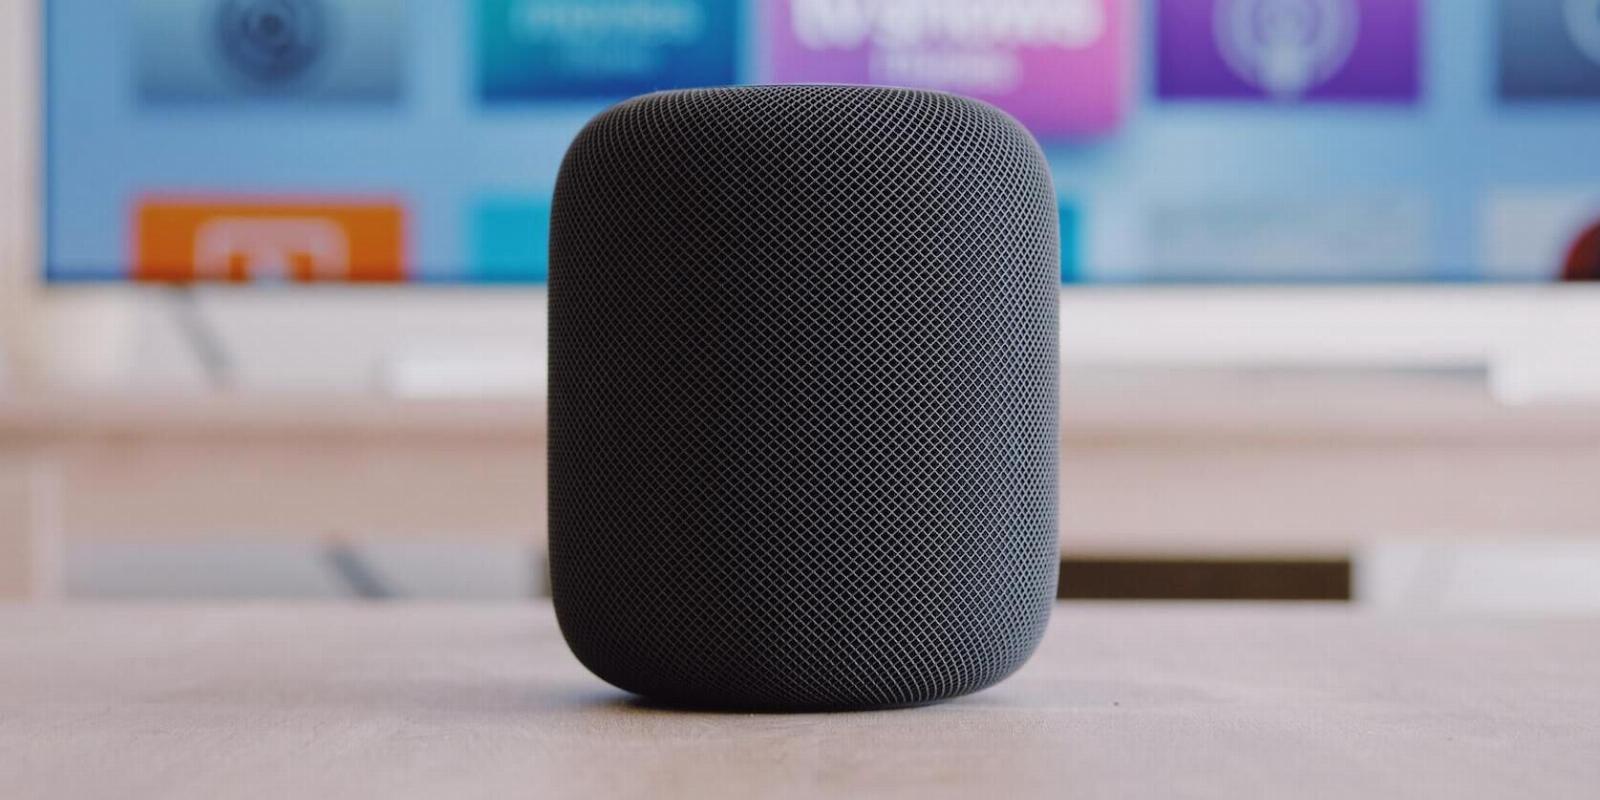 3 Reasons Why Apple’s New HomePod Isn’t What People Were Expecting